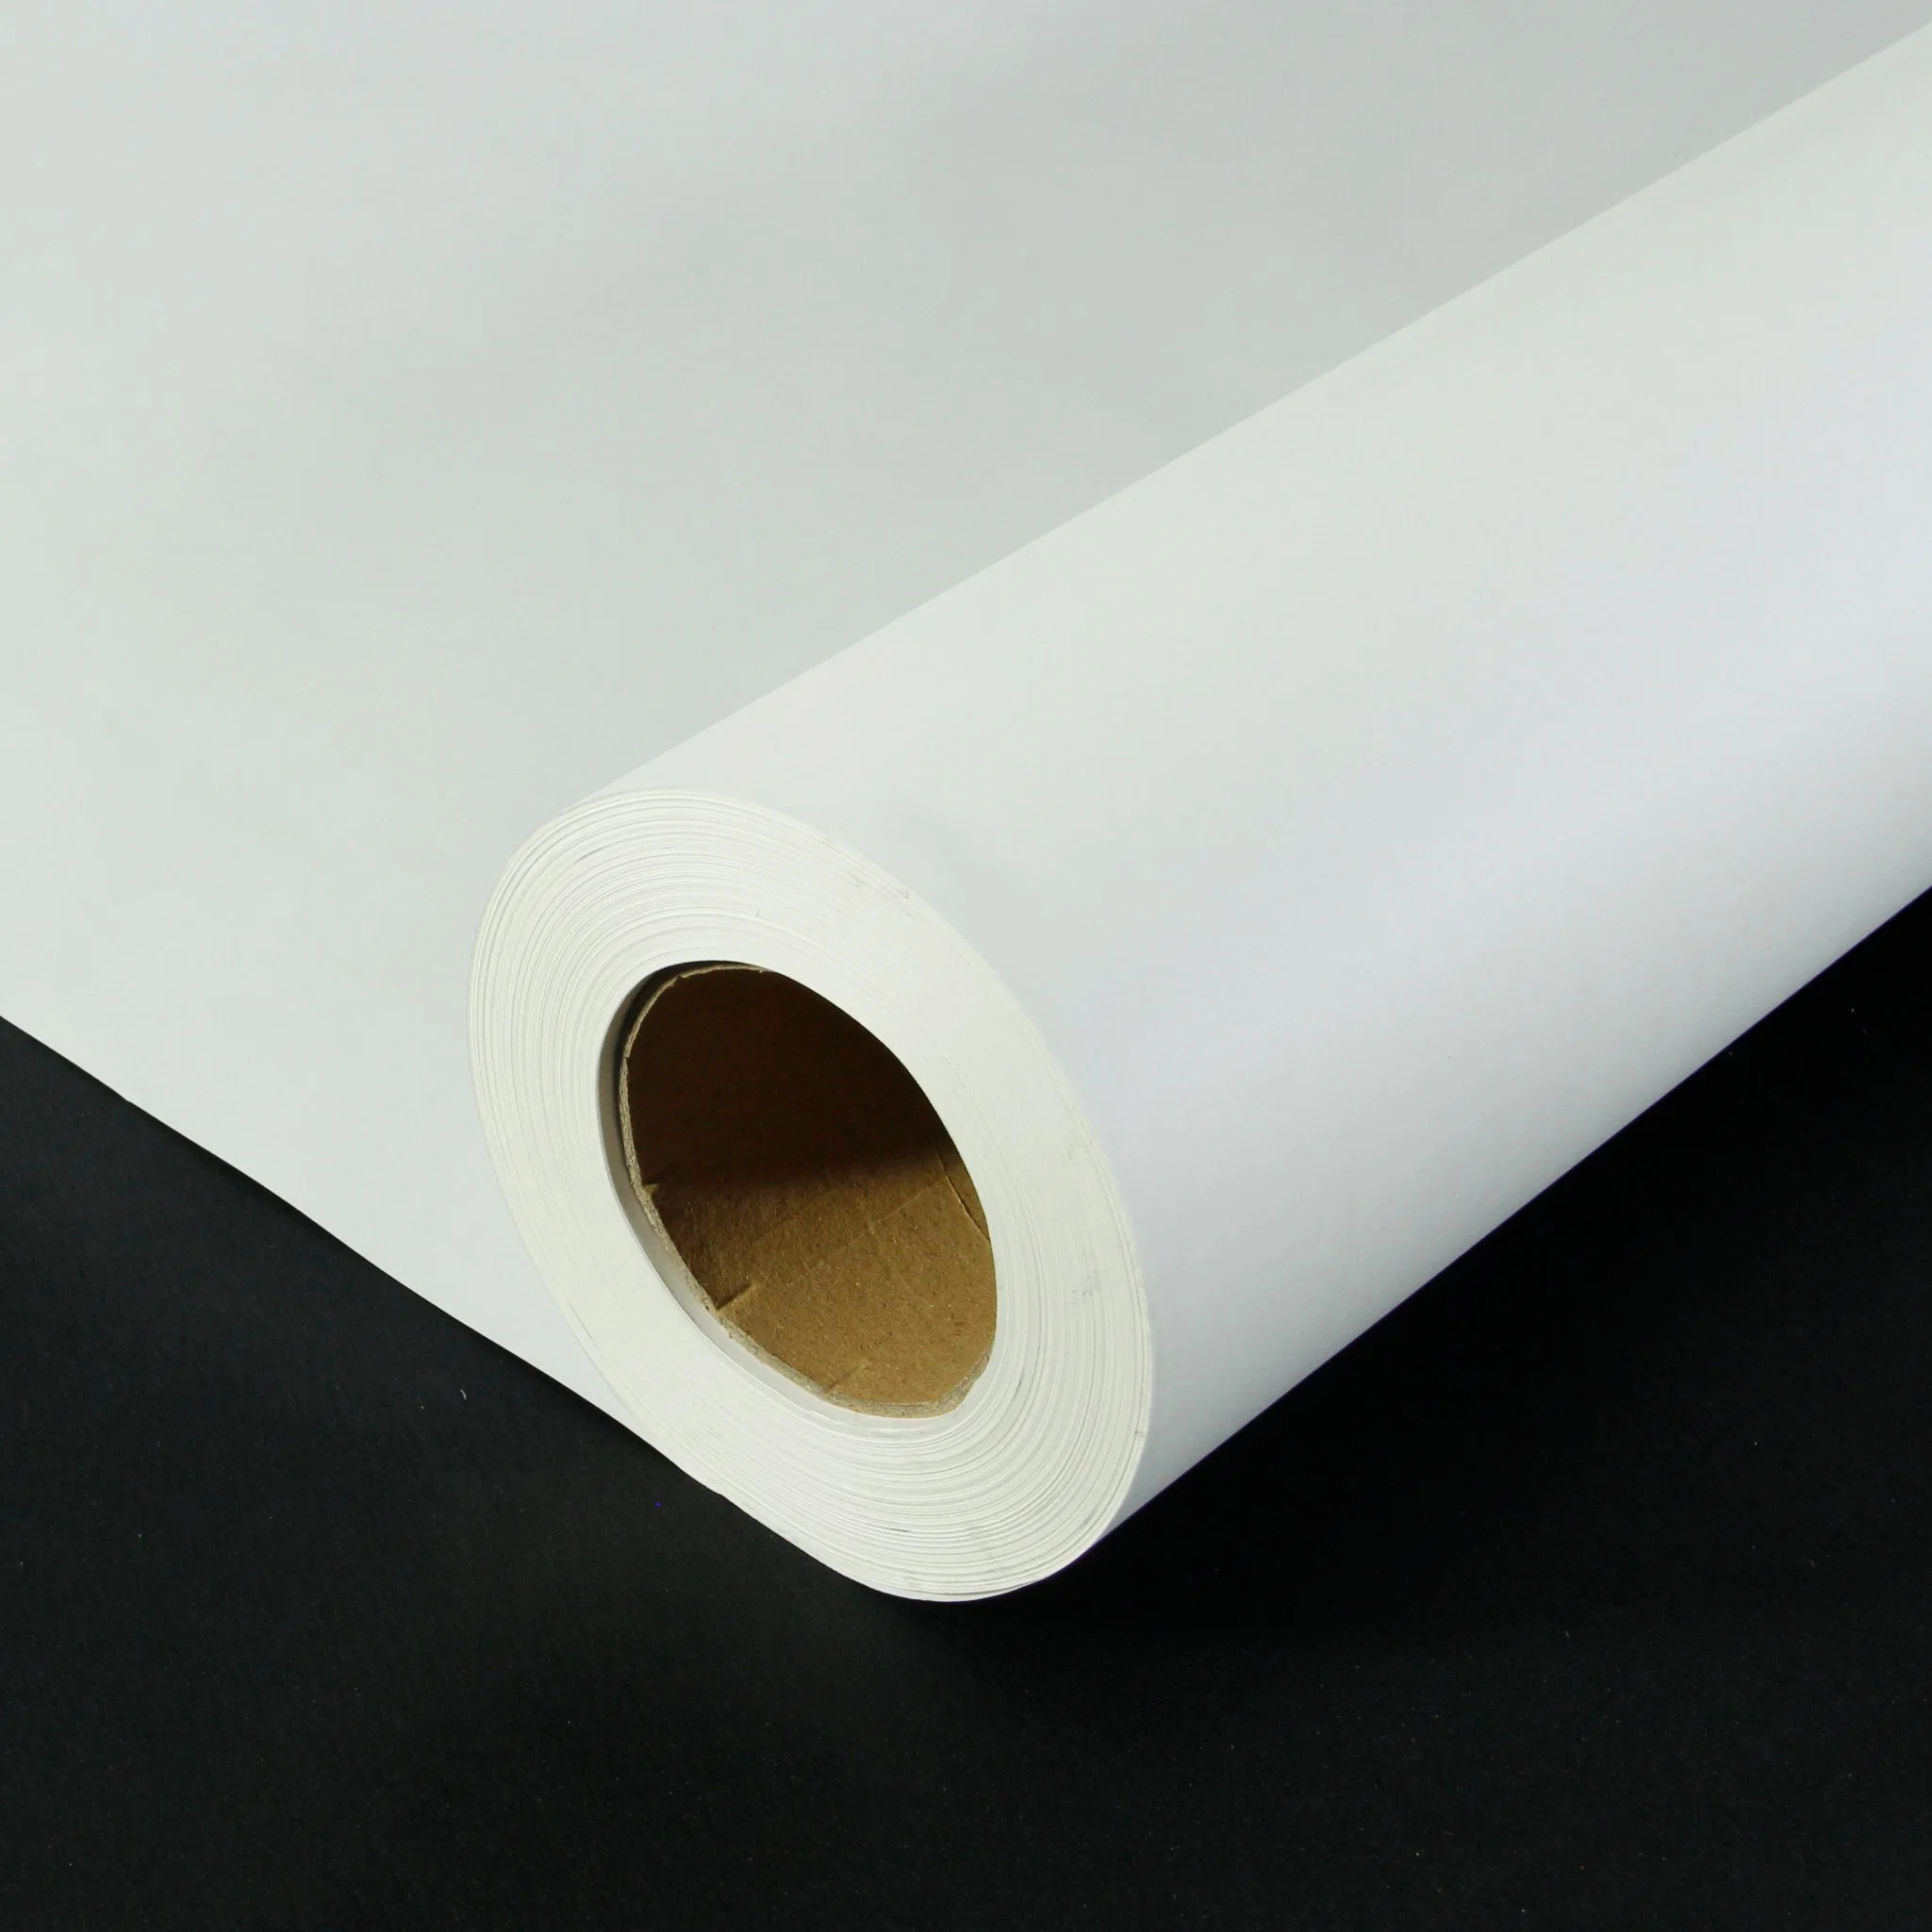 Wholesale/Supplier Custom High quality/High cost performance  100/90/80/60/48 GSM Heat Transfer Sublimation Paper Roll for Heat Transfer Printing on Cotton Clothes and Fabrics, Heat Sublimati